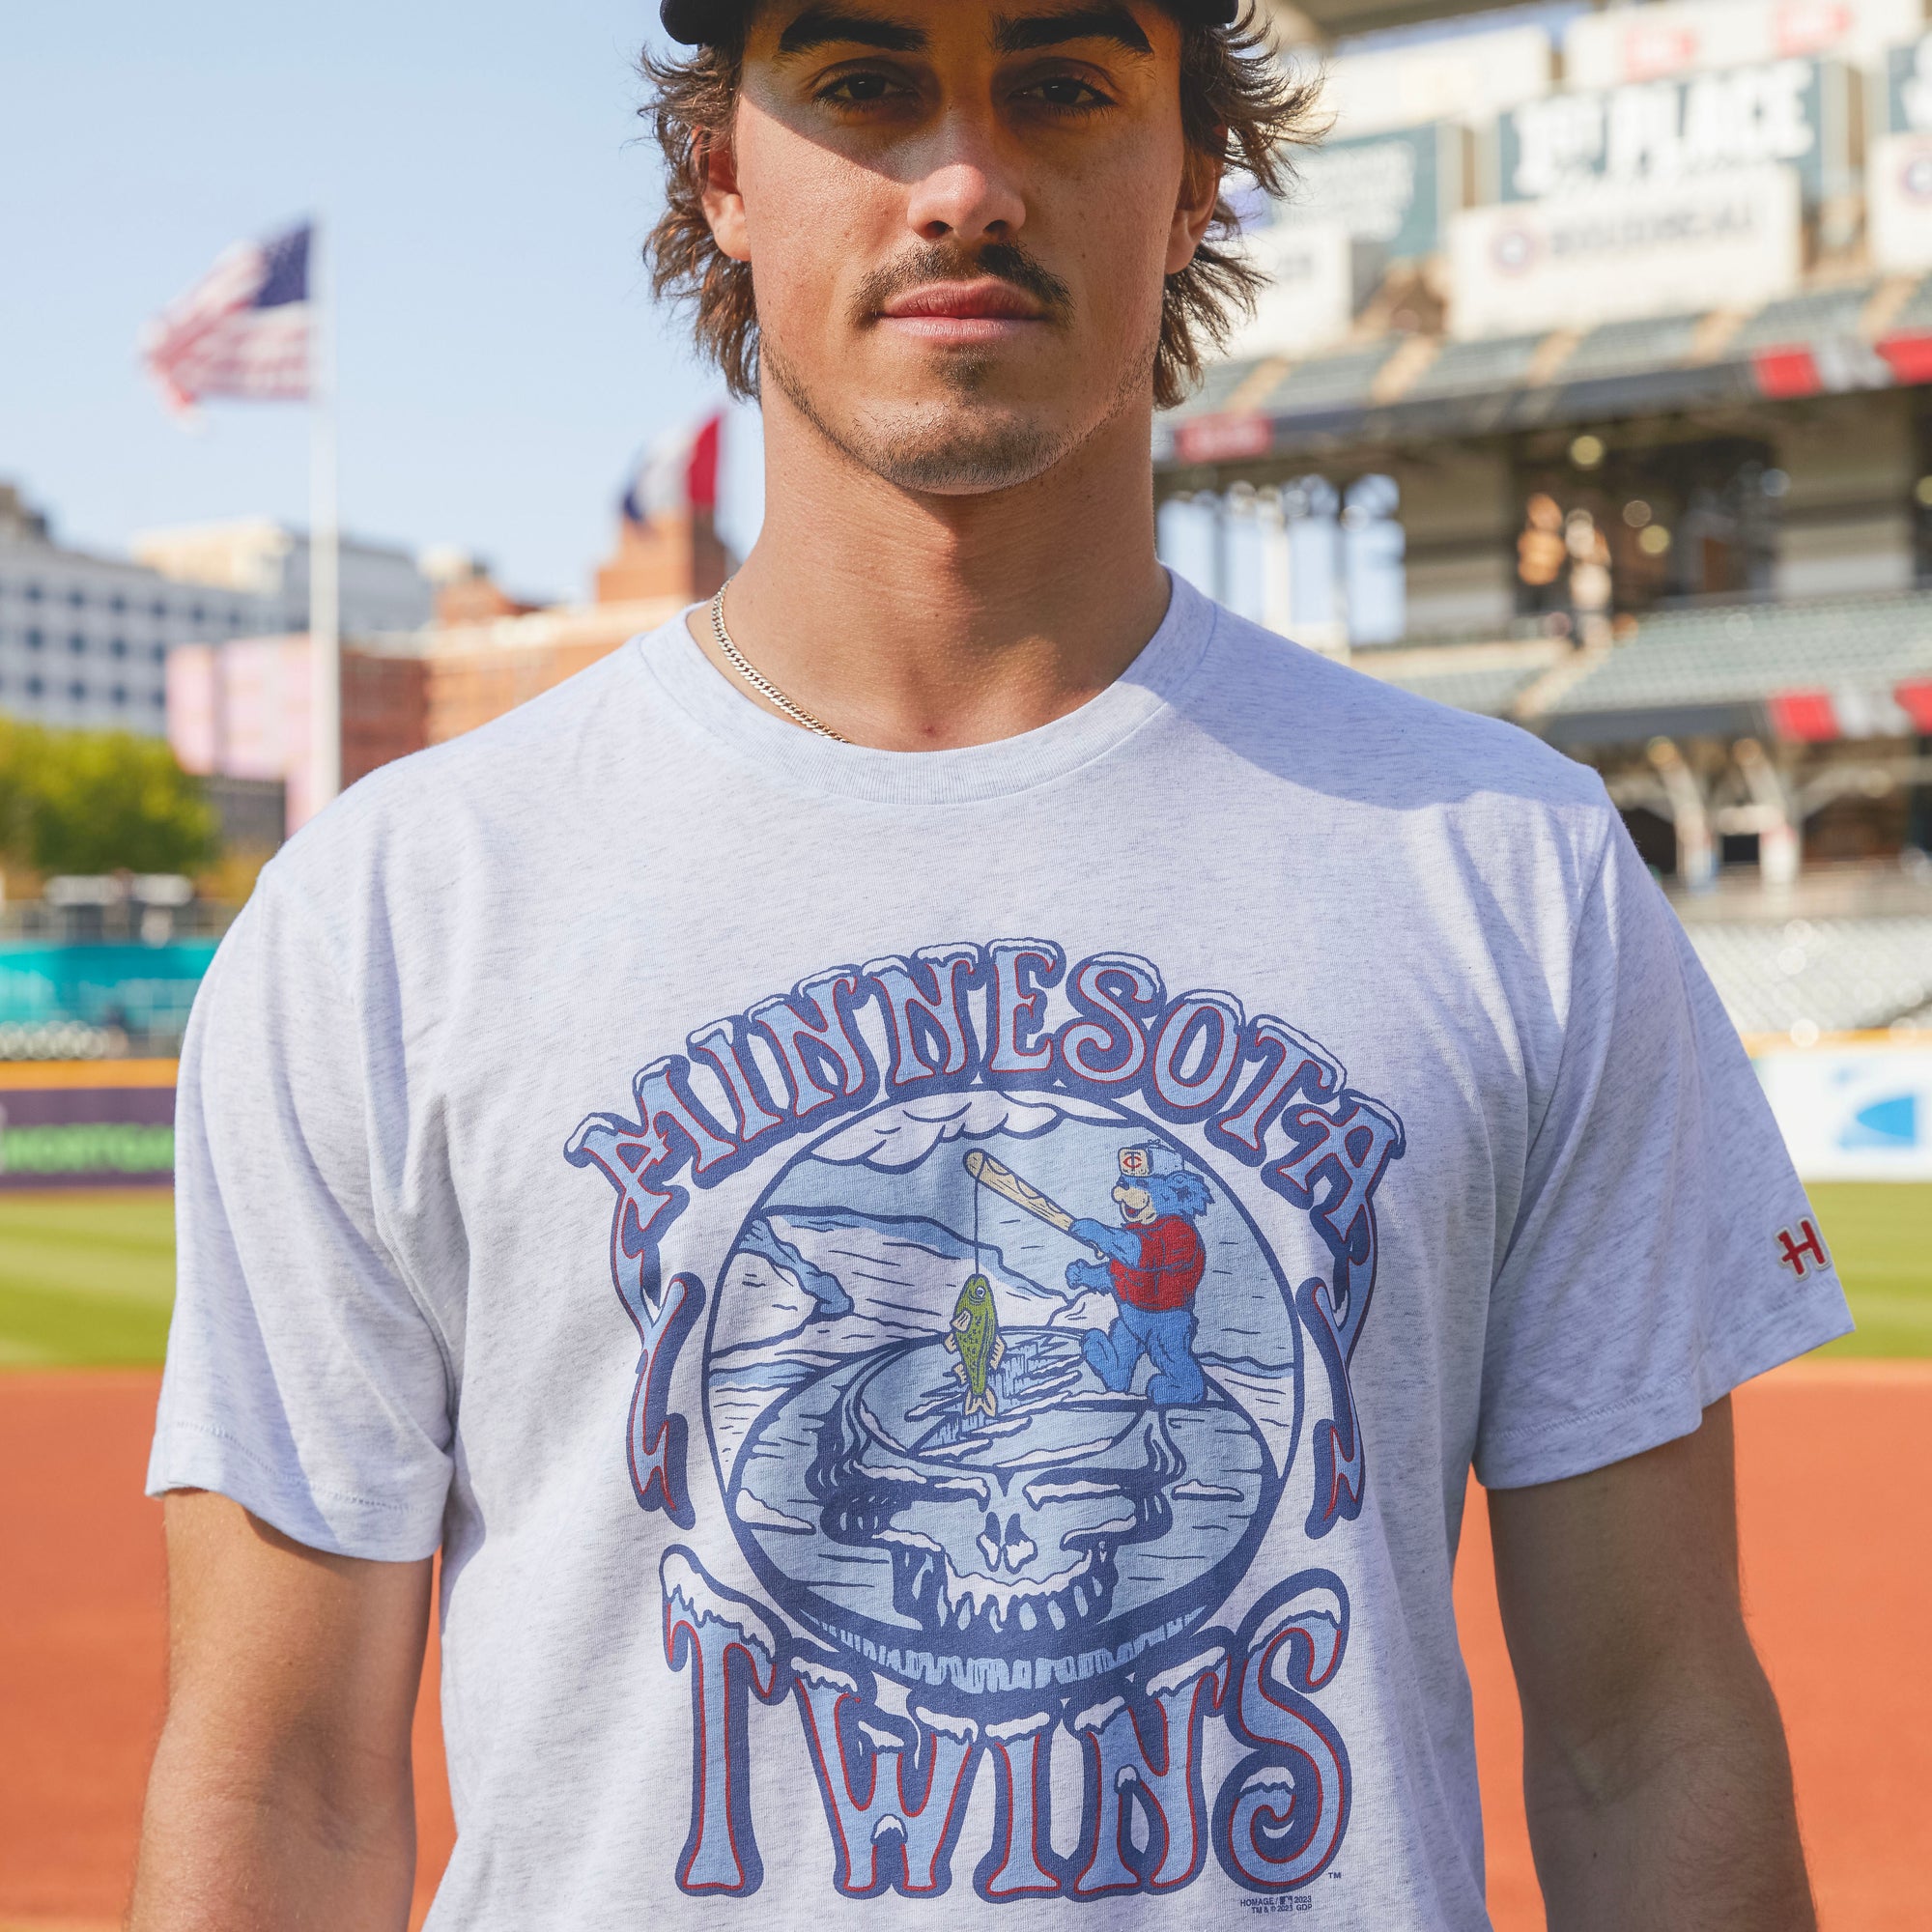 Minnesota Twins '87 T-Shirt from Homage. | Navy | Vintage Apparel from Homage.